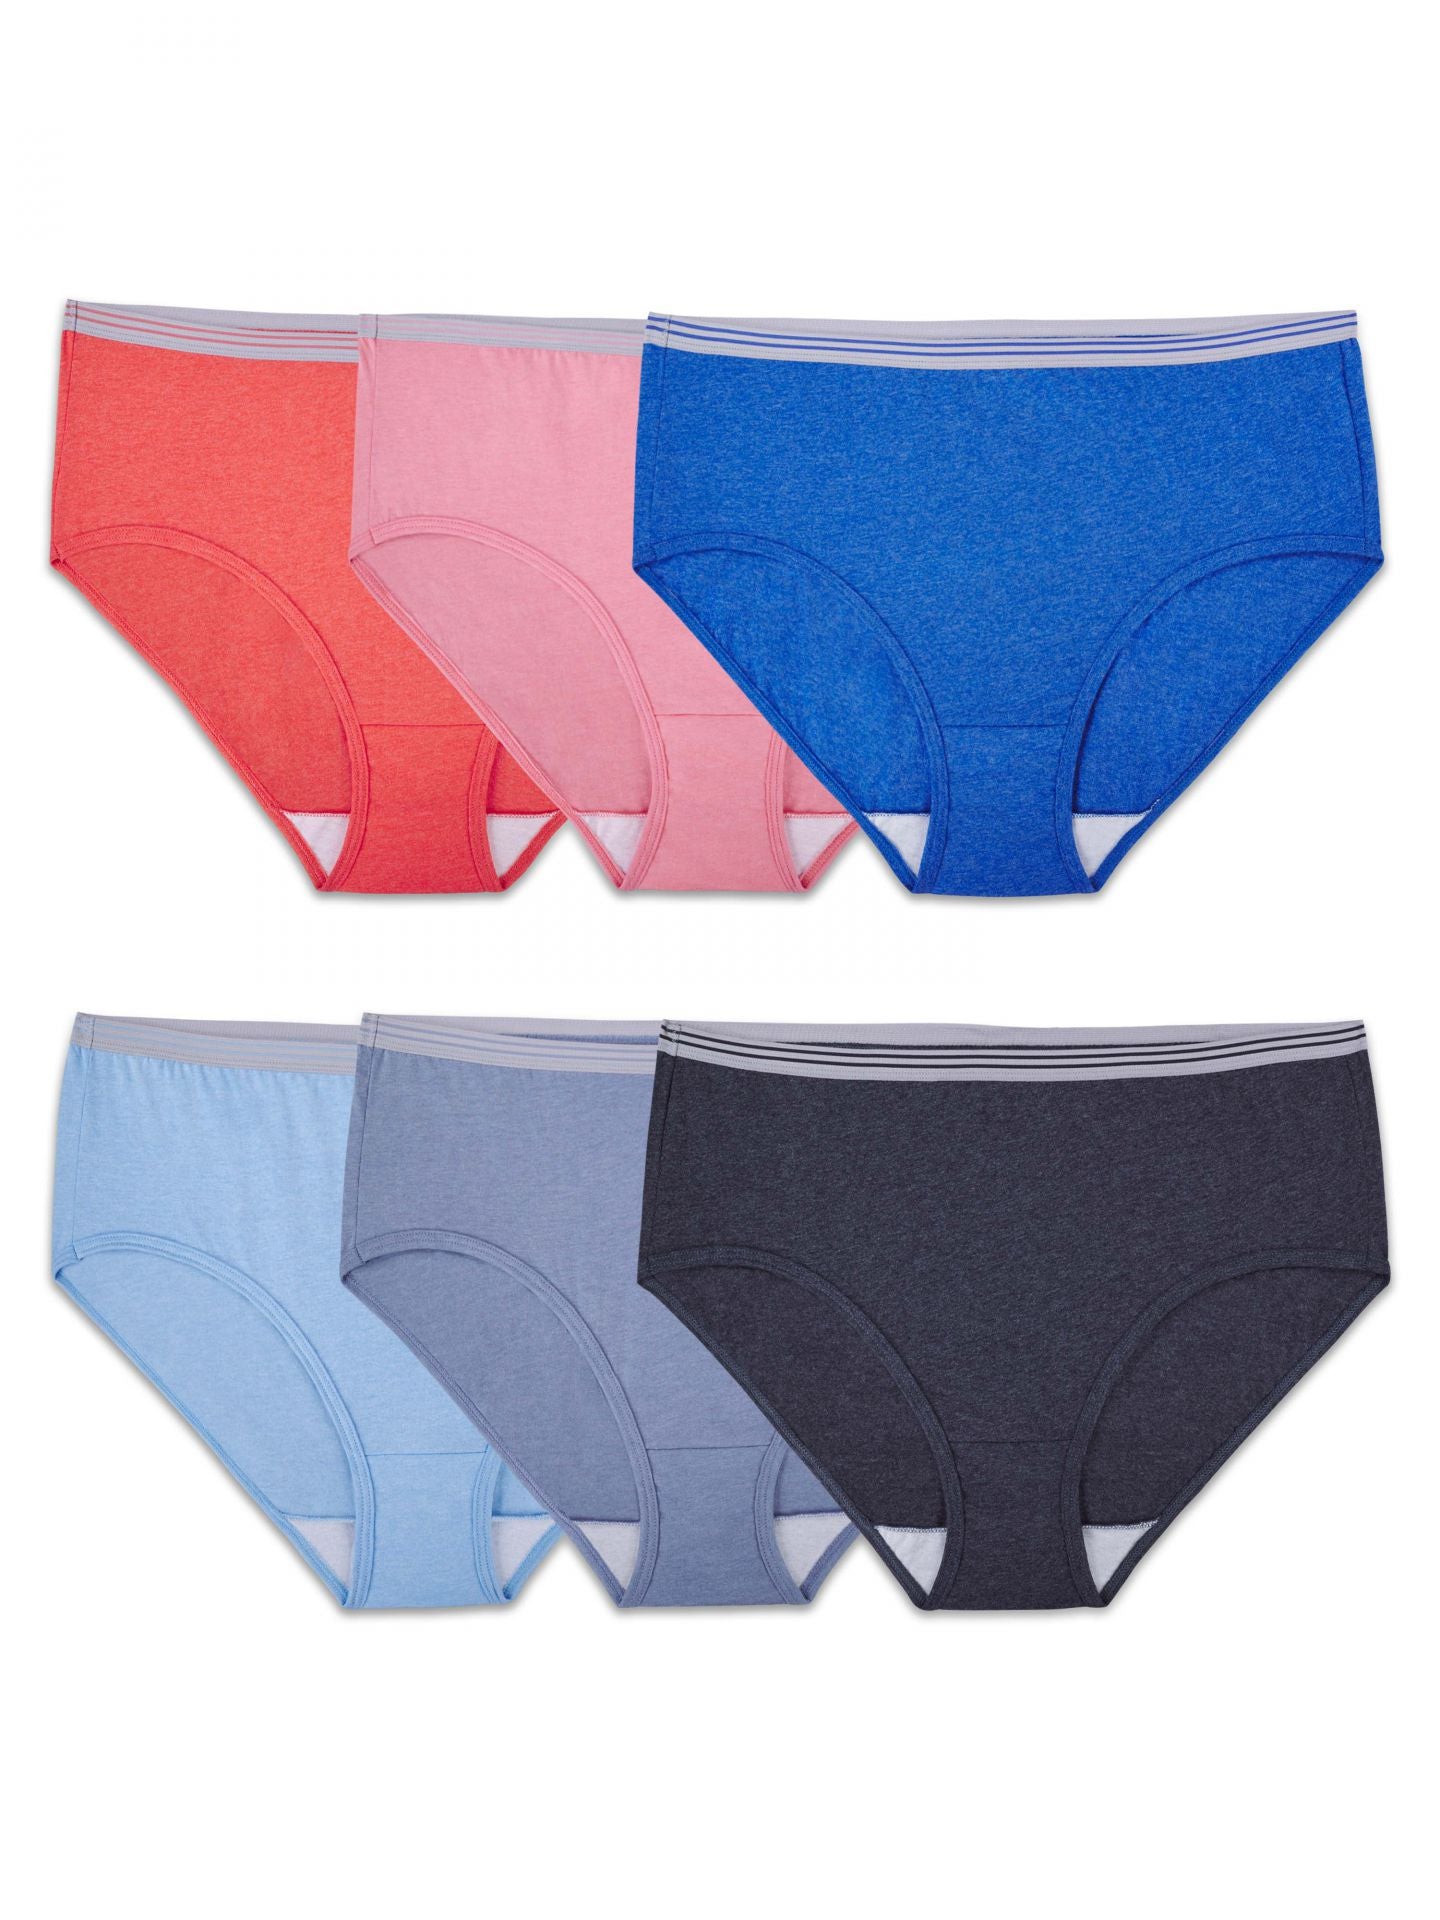 Fruit of the Loom Women`s 6pk Heather Cotton Briefs, 6, Assorted